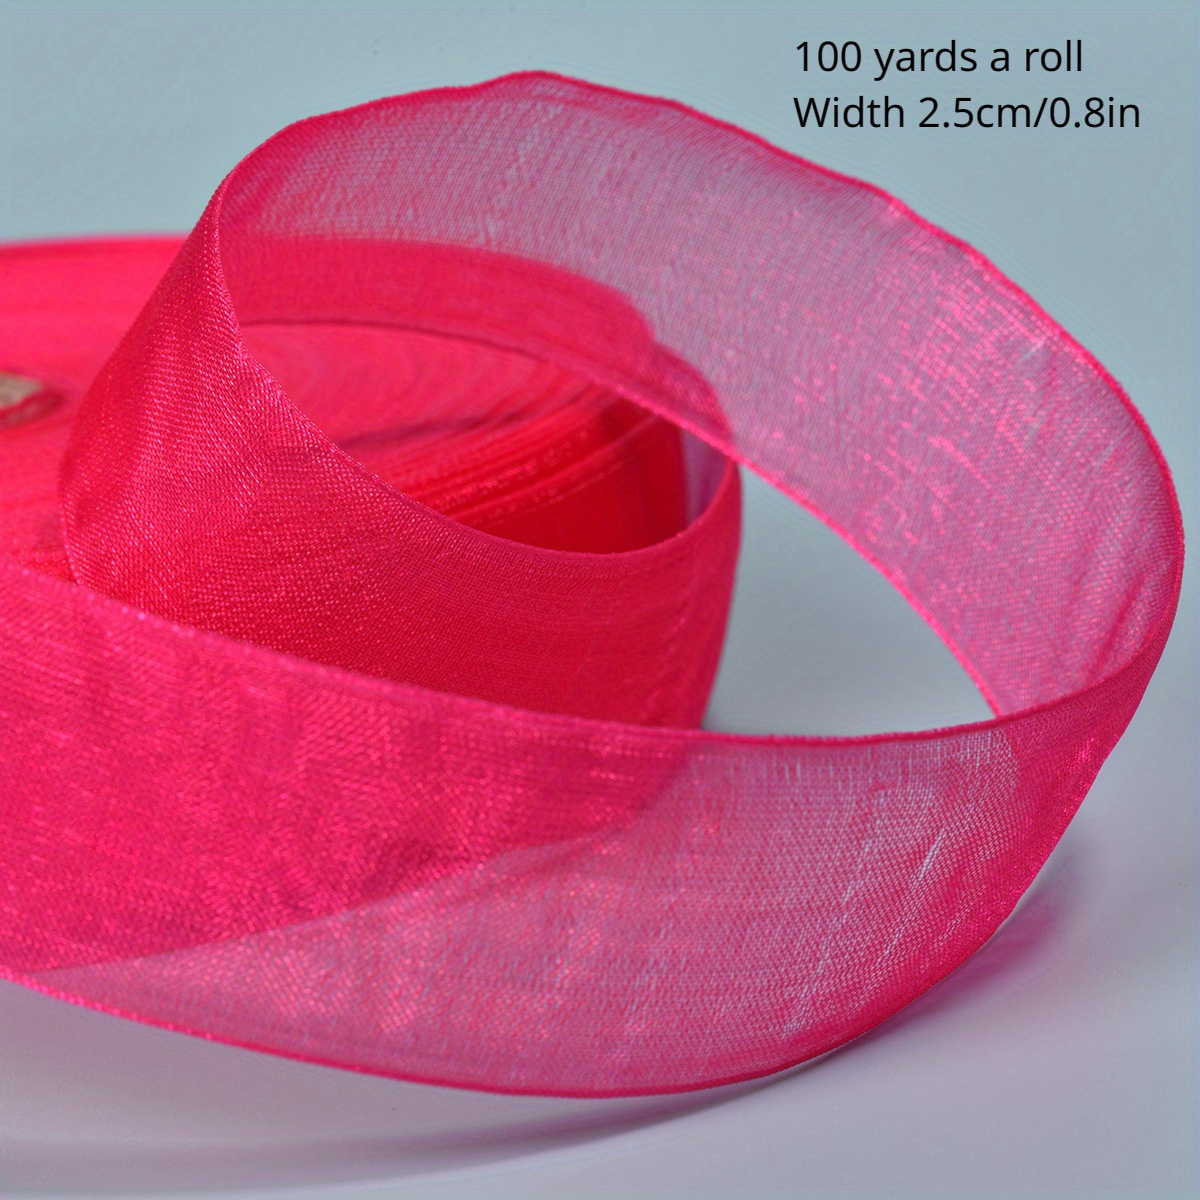 Hot Pink Tulle Ribbon